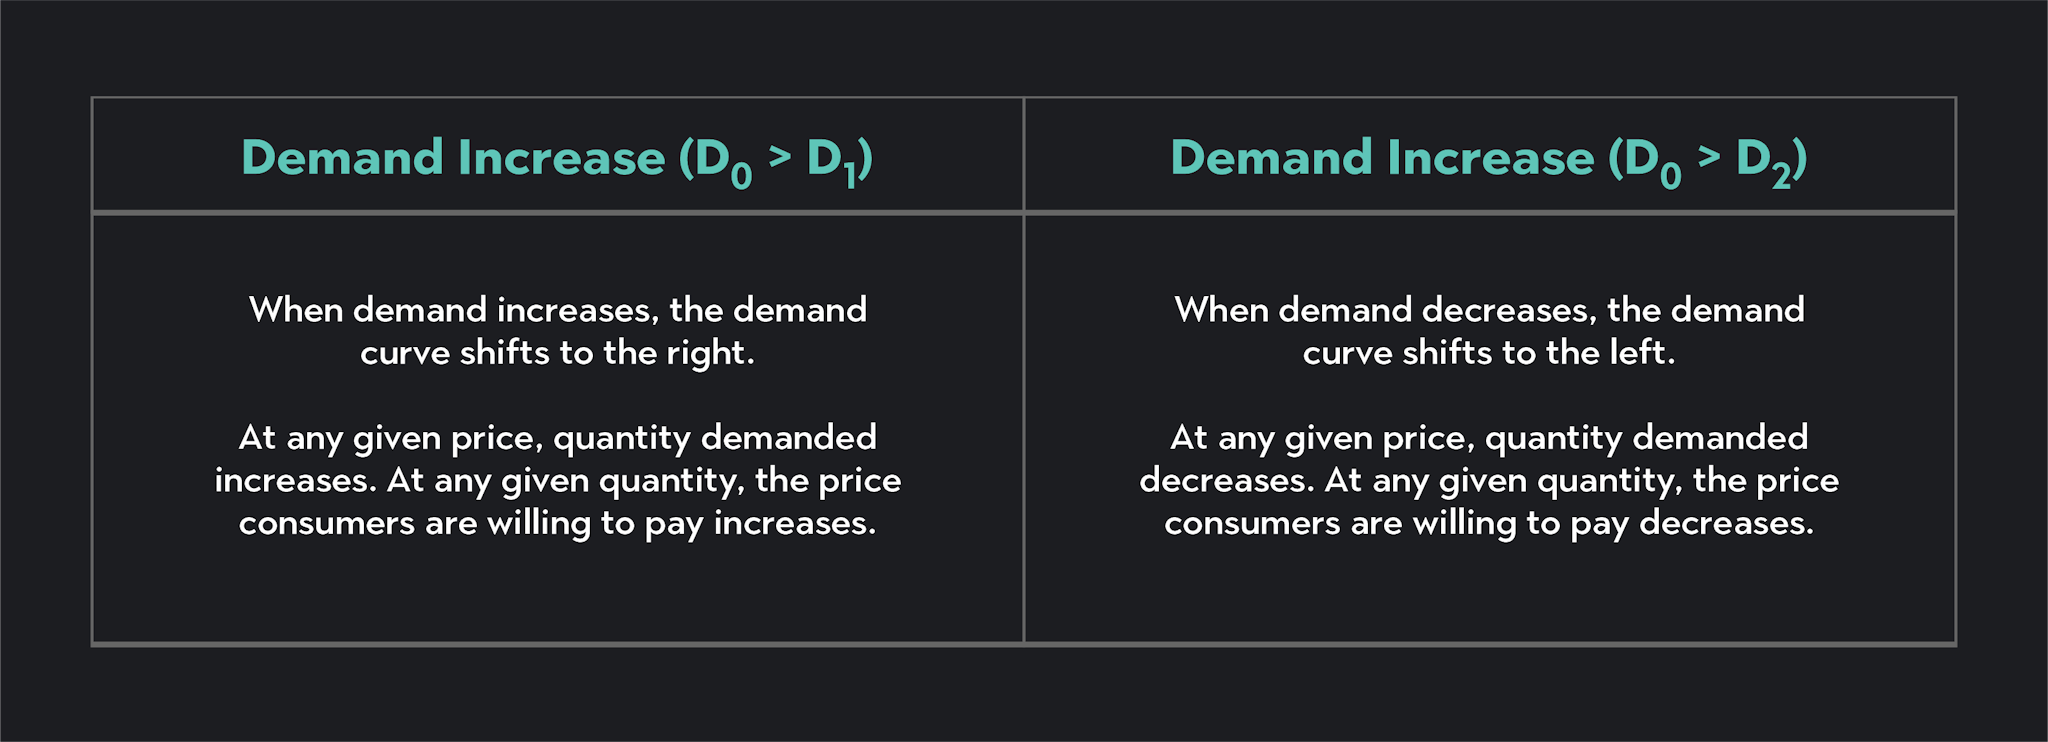 Table explaining the shifts of the demand curve when demand increases or decreases